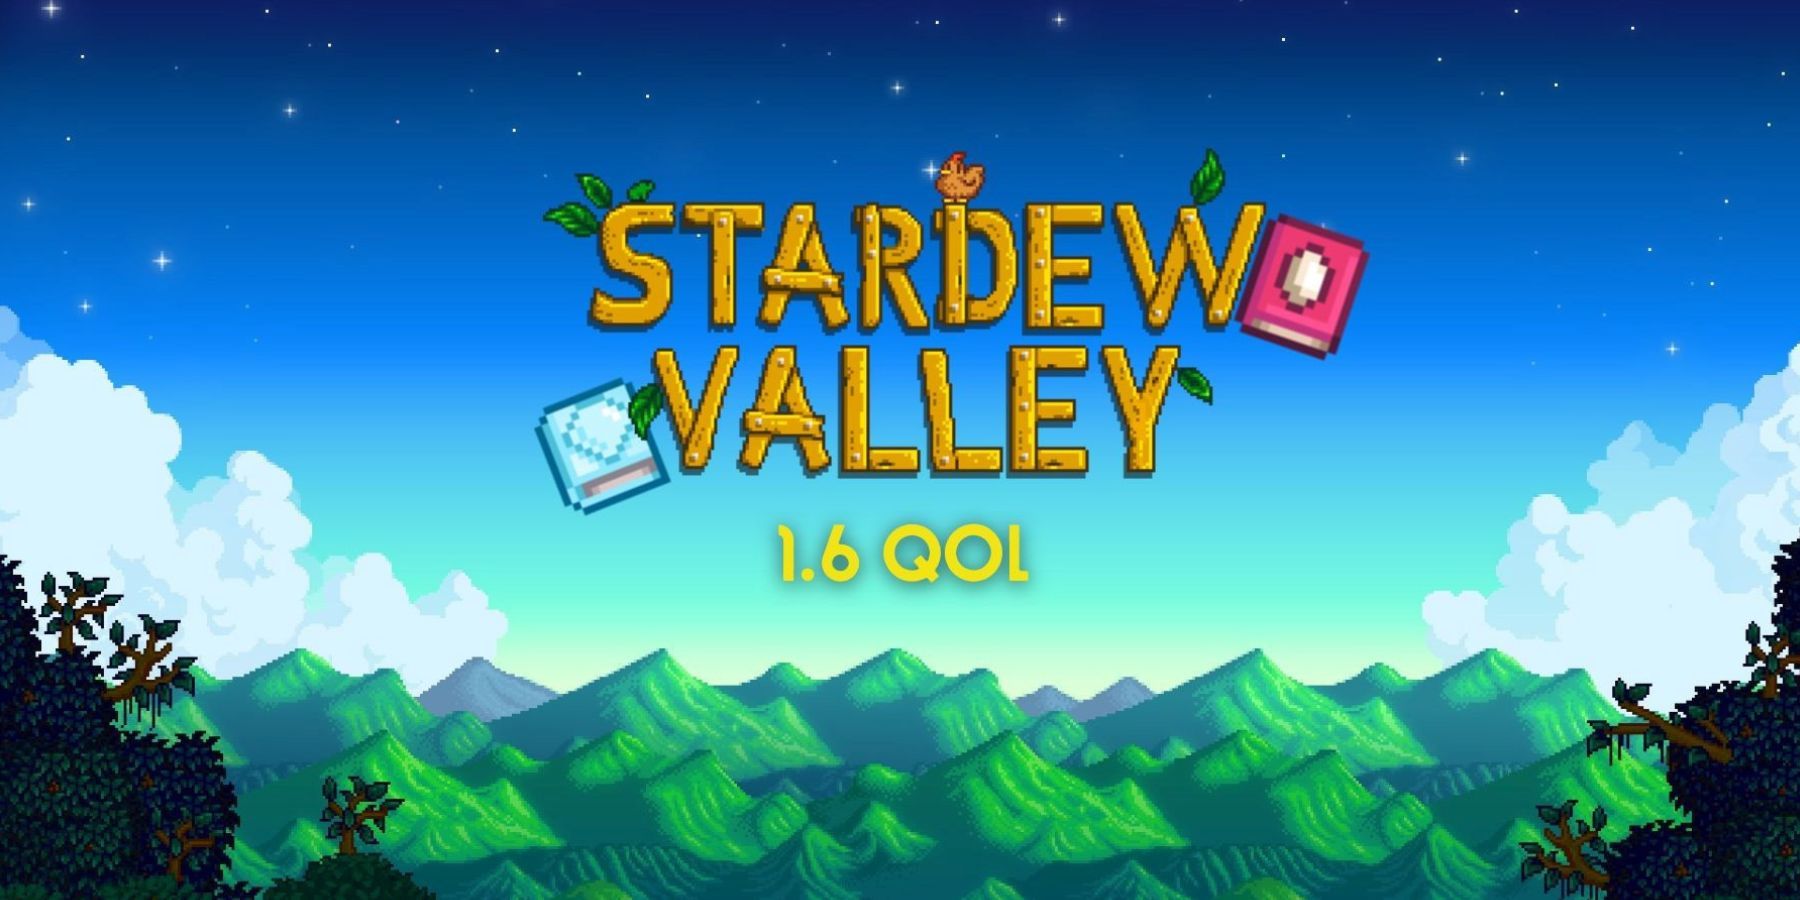  stardew valley logo and art cover.